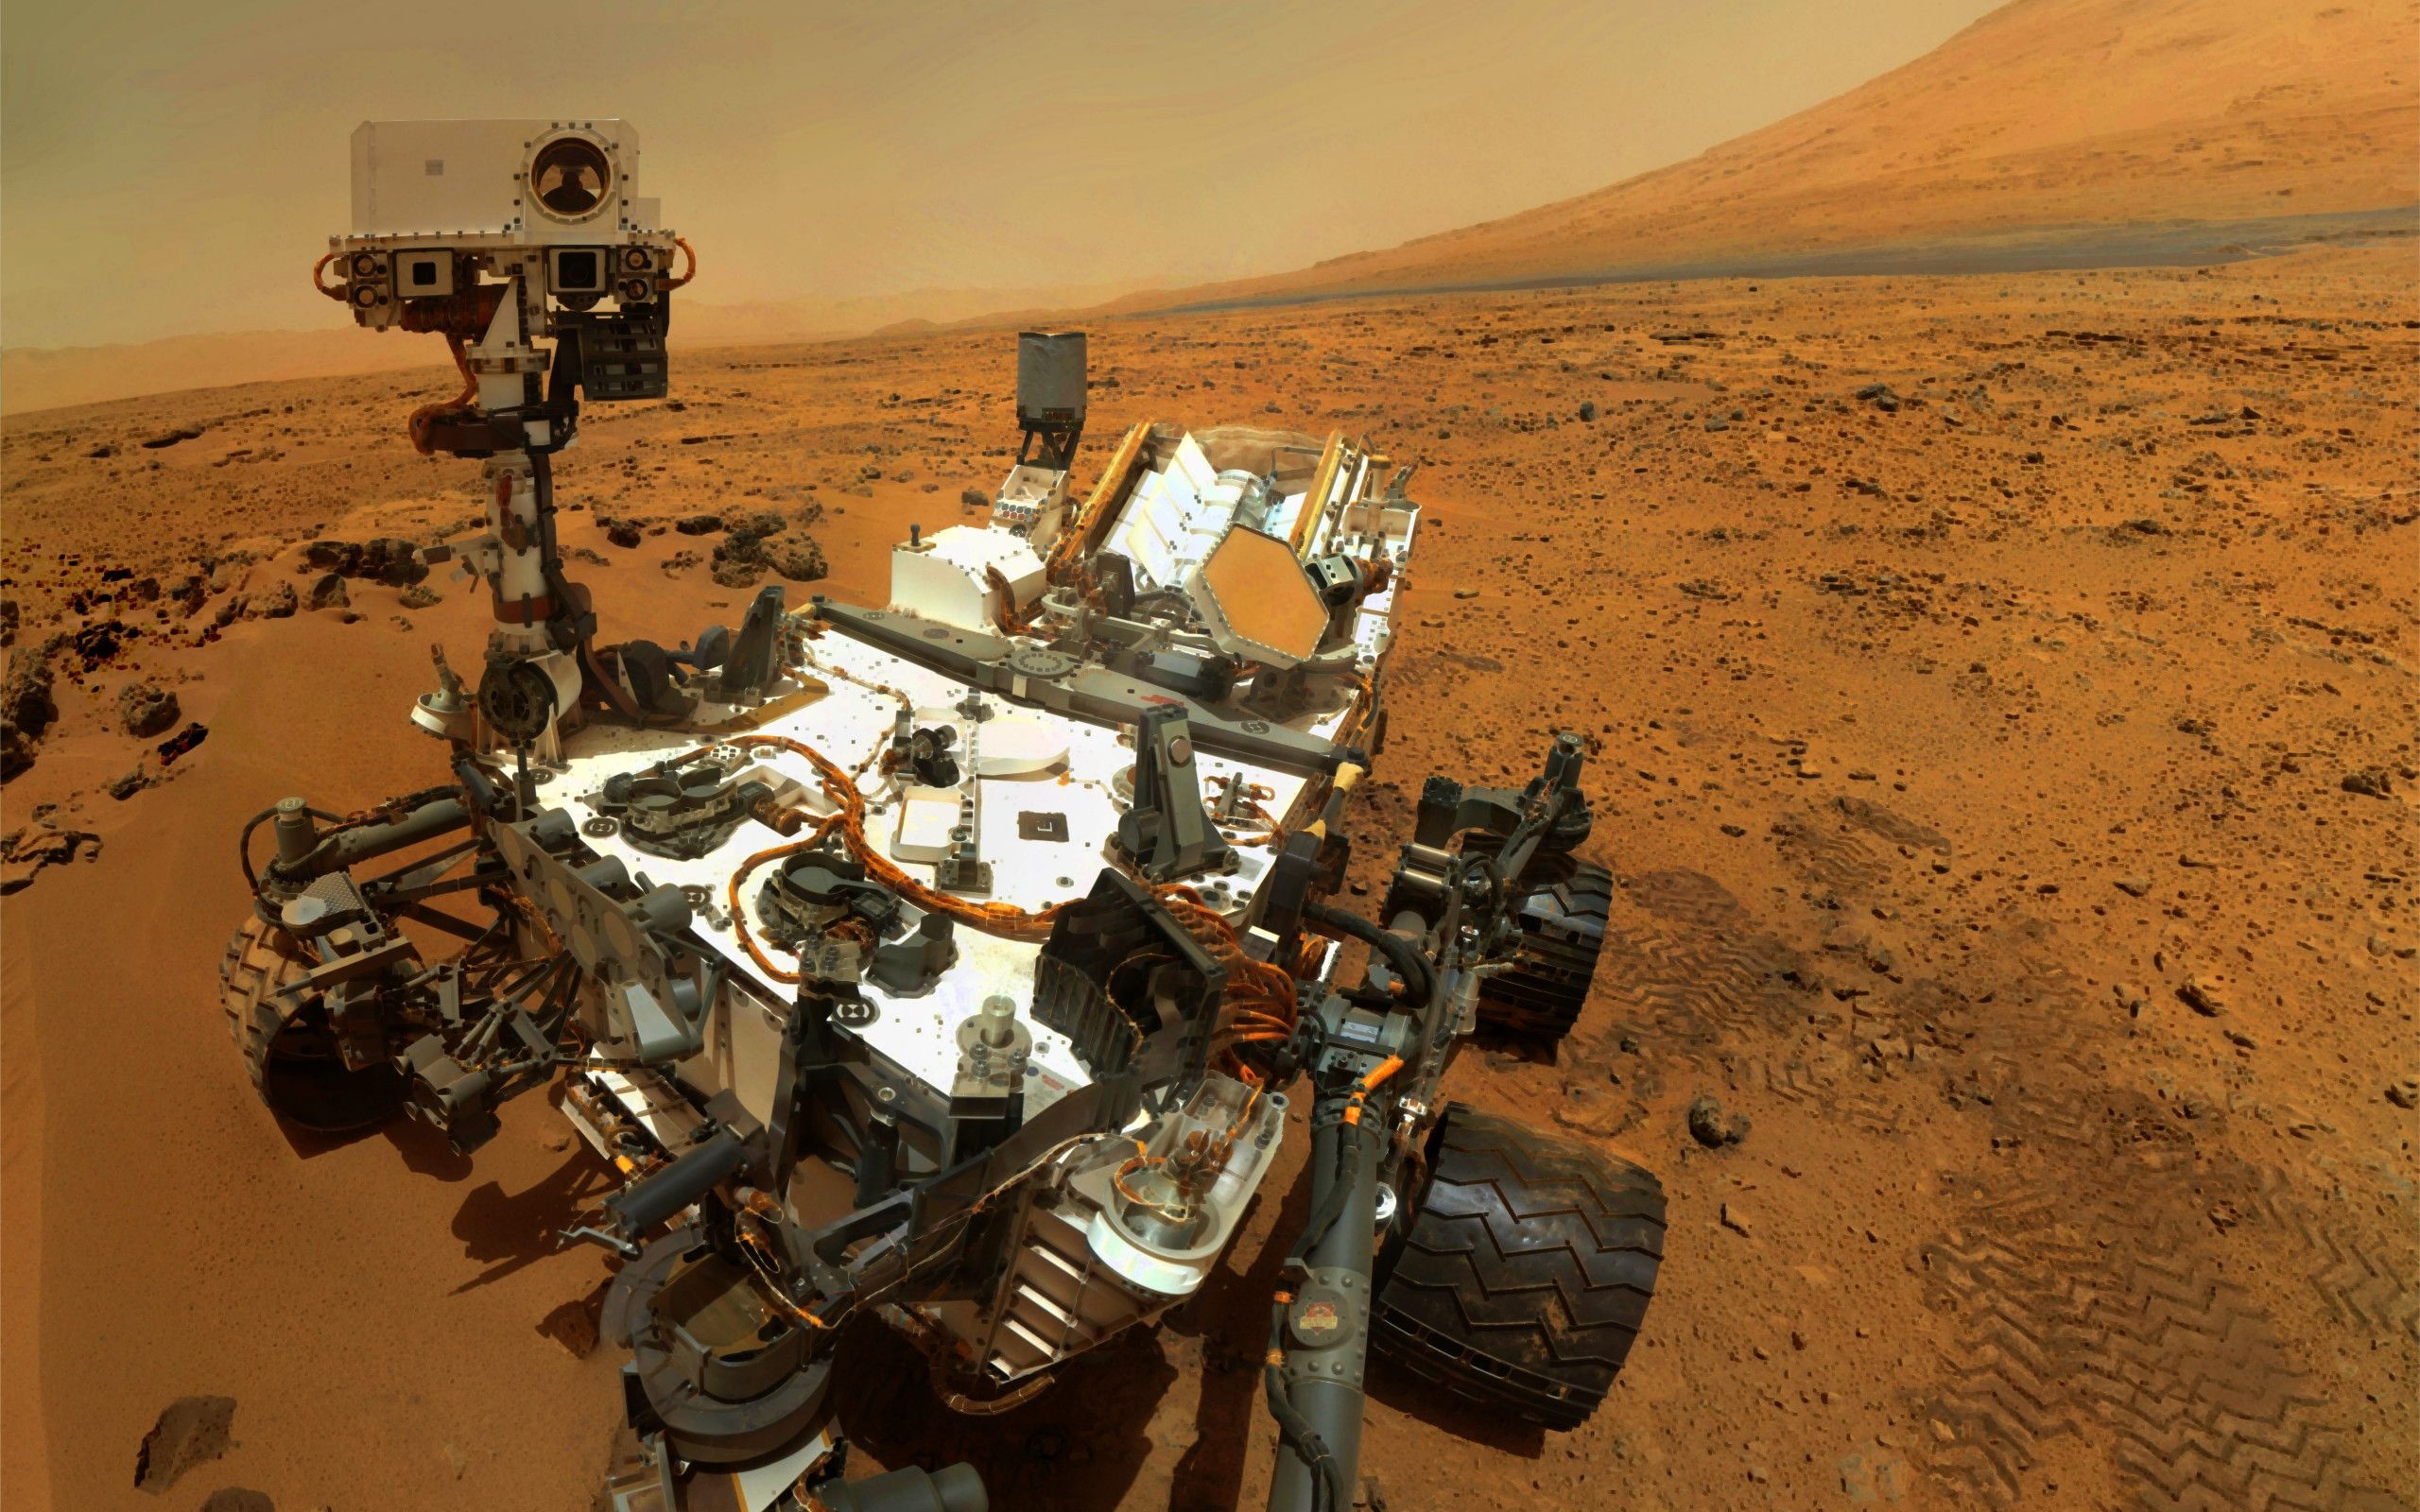 Curiosity rover wallpapers, Free backgrounds, Space exploration, Martian scenery, 2560x1600 HD Desktop